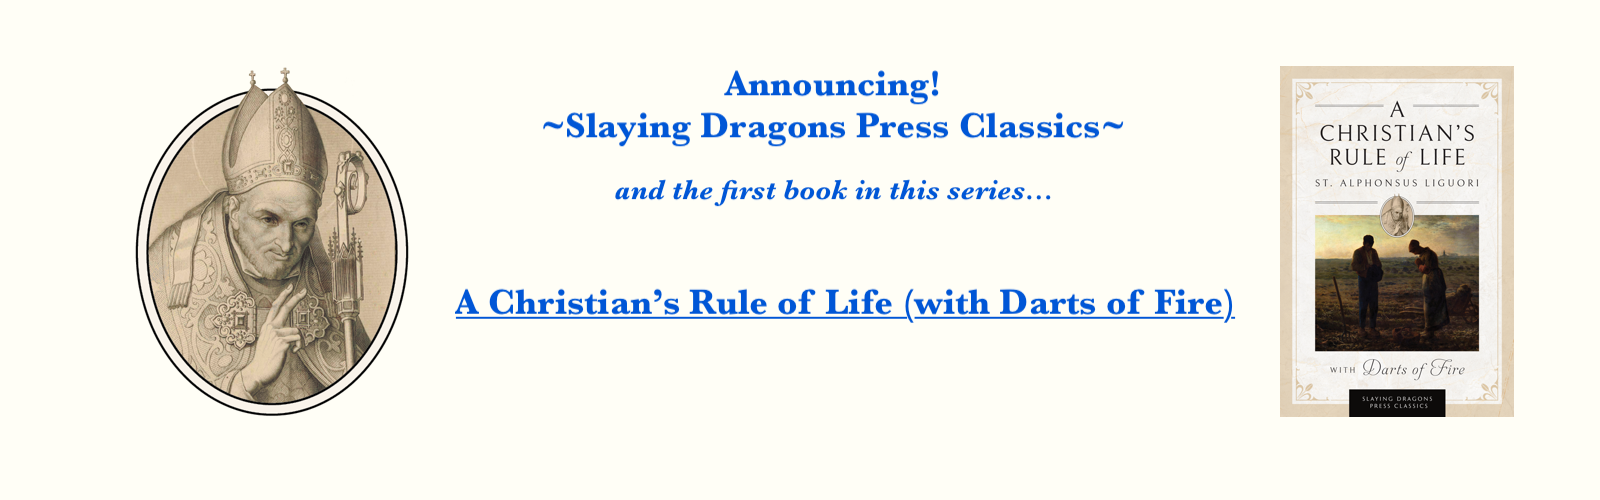 Introducing the new book, "A Christian’s Rule of Life (with Darts of Fire)"!